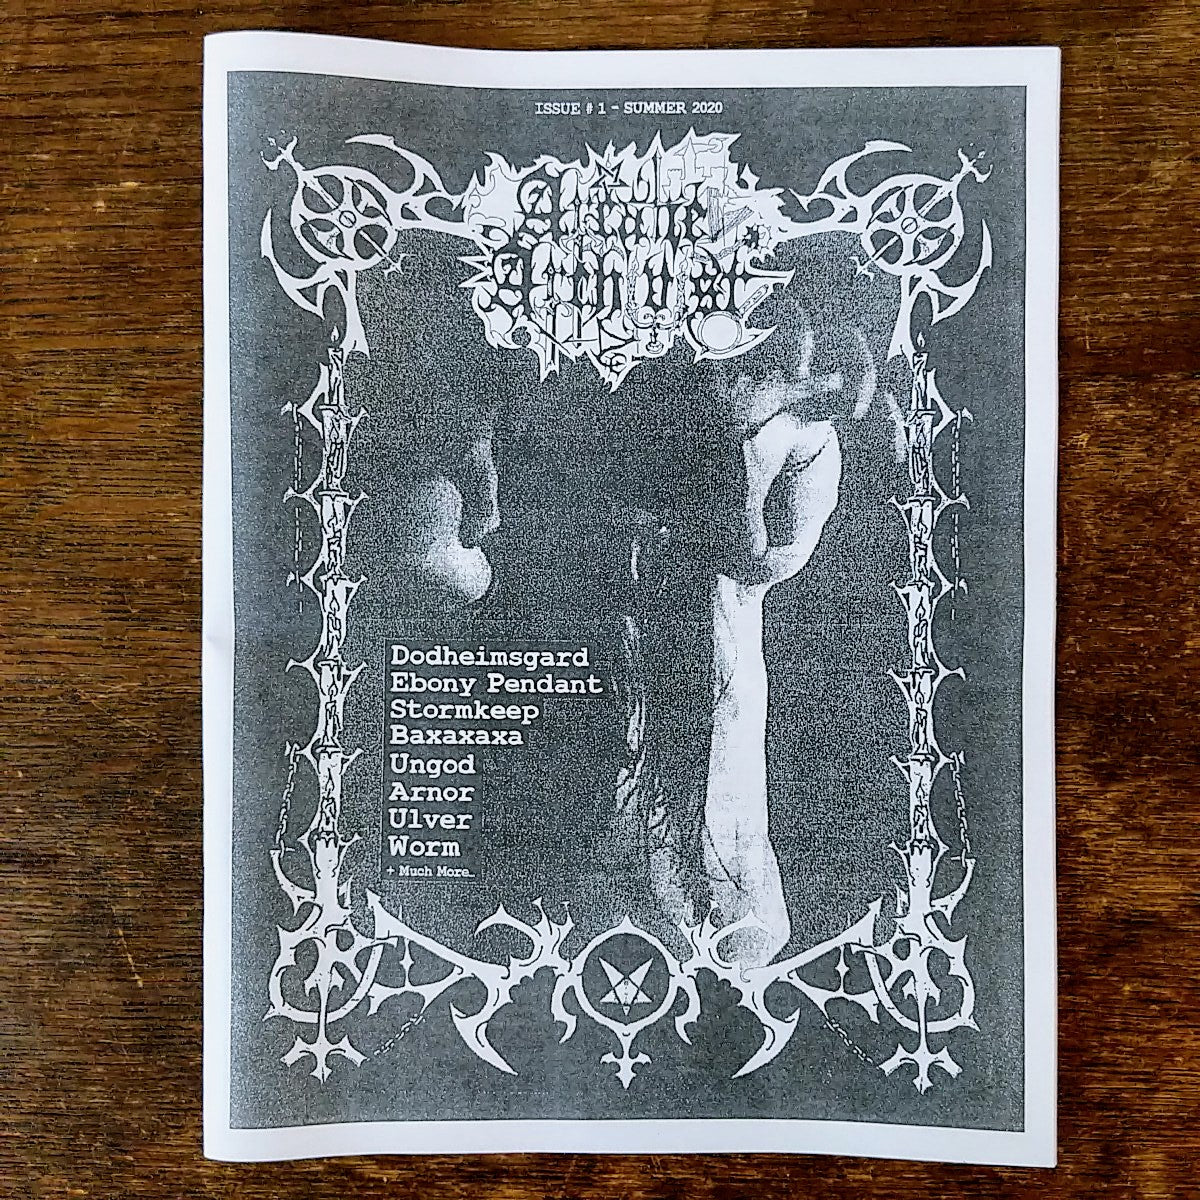 [SOLD OUT] ARCANE ARCHIVIST ISSUE #1